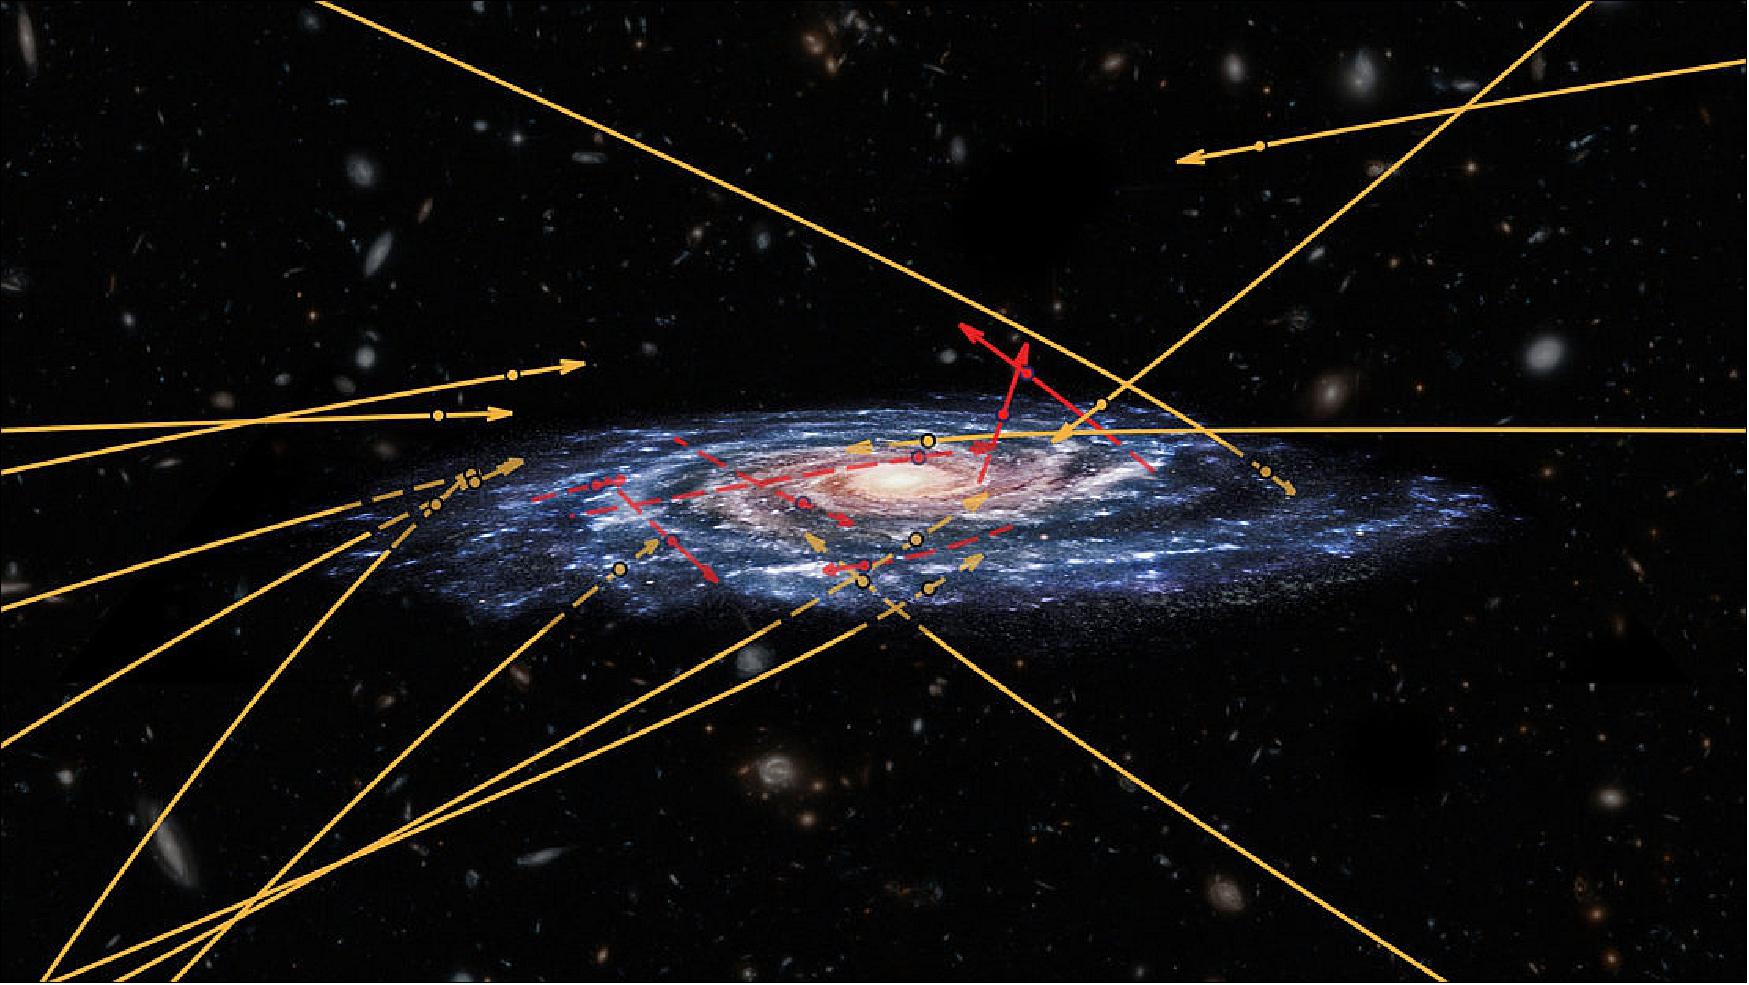 Figure 35: The positions and reconstructed orbits of 20 high-velocity stars, represented on top of an artistic view of our Galaxy, the Milky Way. These stars were identified using data from the second release of ESA's Gaia mission. The seven stars shown in red are sprinting away from the Galaxy and could be travelling fast enough to eventually escape its gravity. Surprisingly, the study revealed also thirteen stars, shown in orange, that are racing towards the Milky Way: these could be stars from another galaxy, zooming right through our own [image credit: ESA (artist's impression and composition); Marchetti et al 2018 (star positions and trajectories); NASA/ESA/Hubble (background galaxies), CC BY-SA 3.0 IGO]